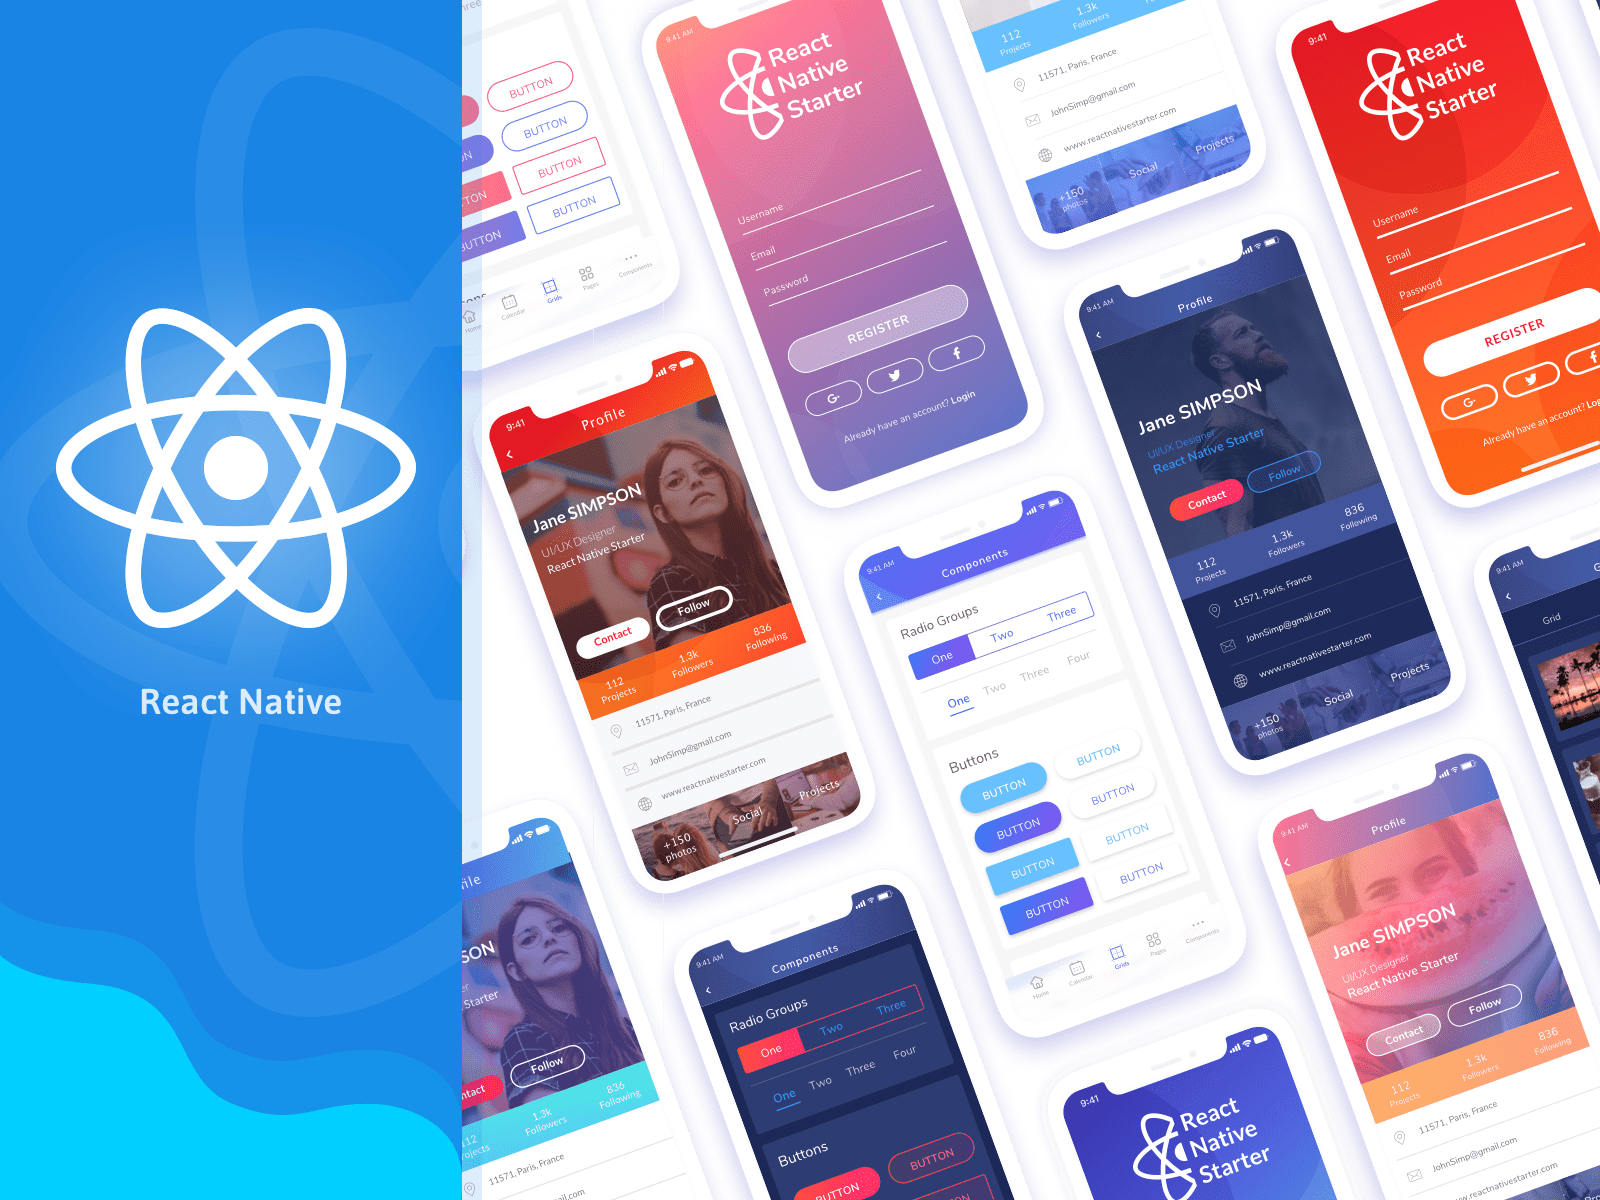 Why Choose React Native for Mobile Development + Tutorial on How to start an App